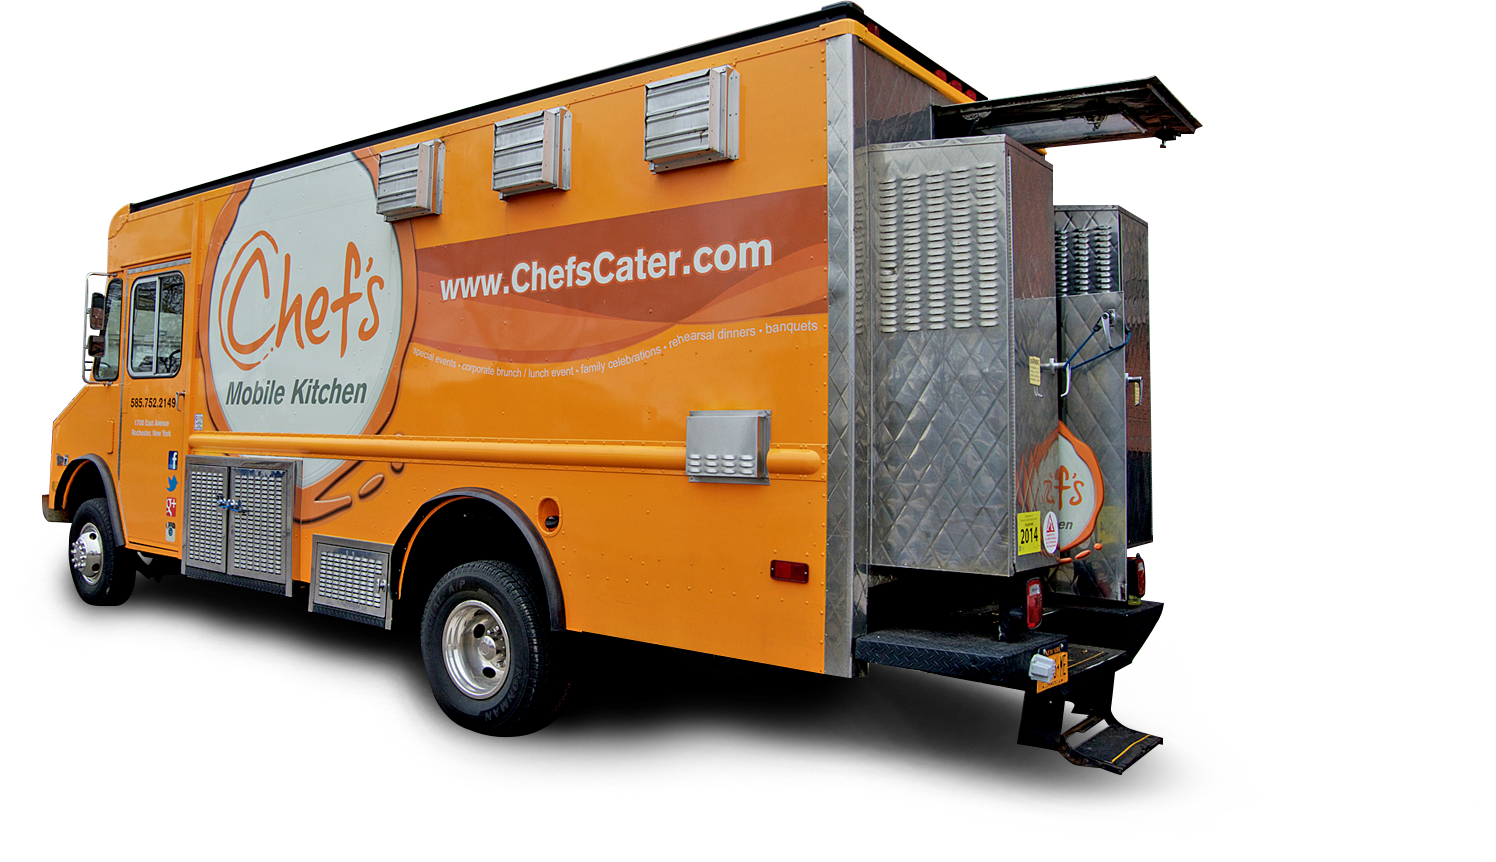 Chef's Catering Bus - Chefs Catering Food Truck (1496x862)